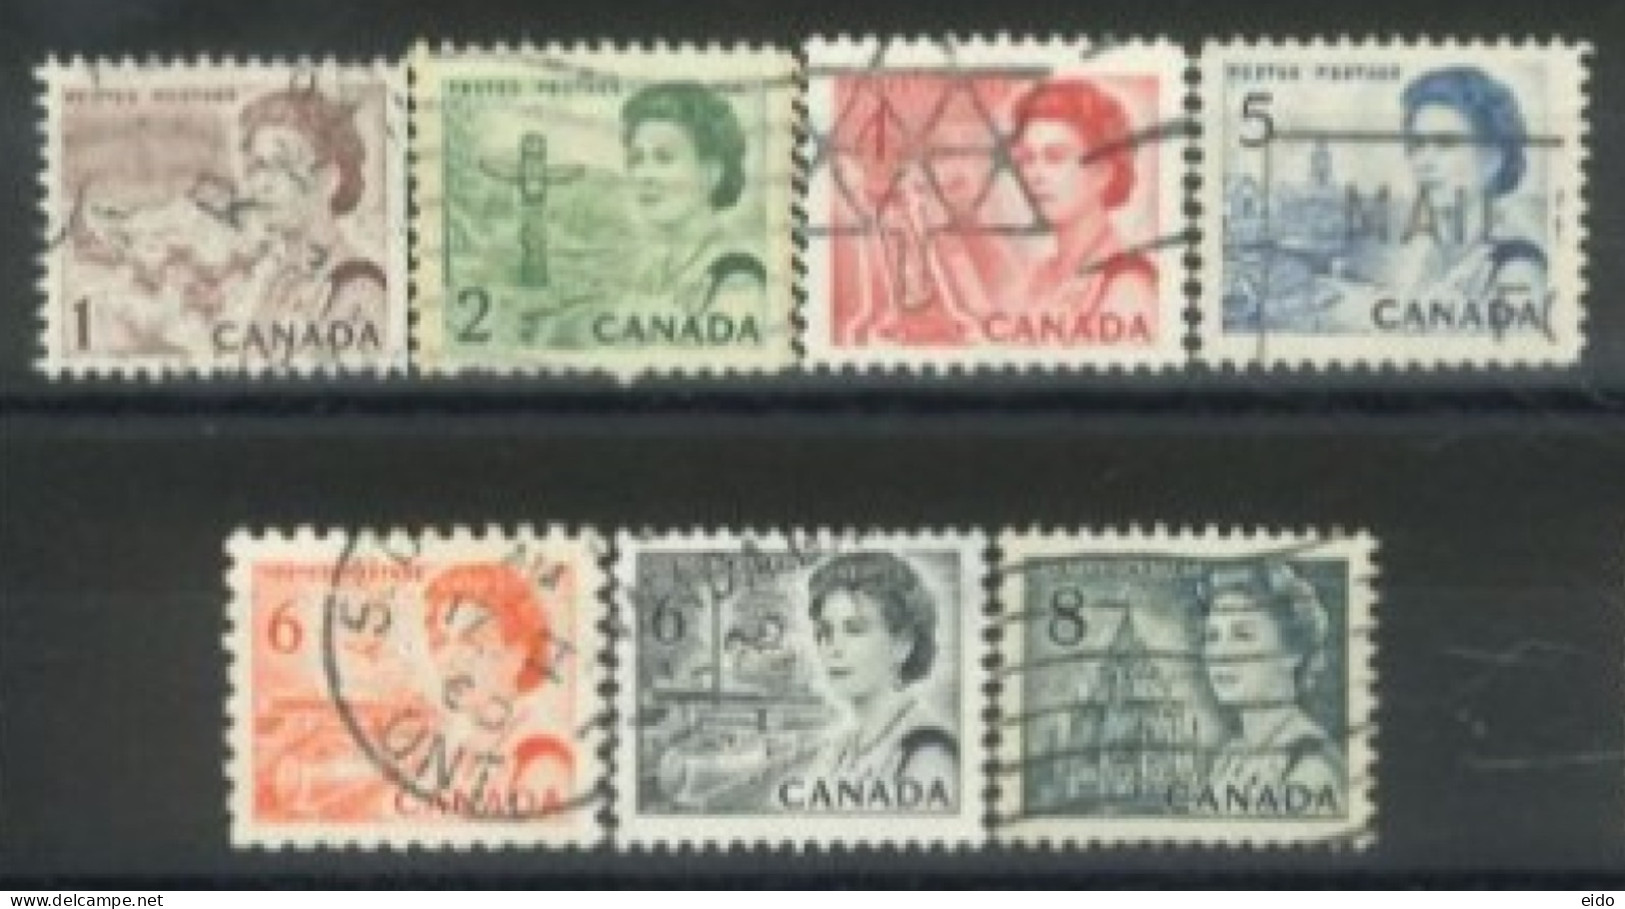 CANADA - 1967, QUEEN ELIZABETH II NORTHERN LIGHTS & DOG TEAM STAMPS SET OF 7, USED. - Used Stamps